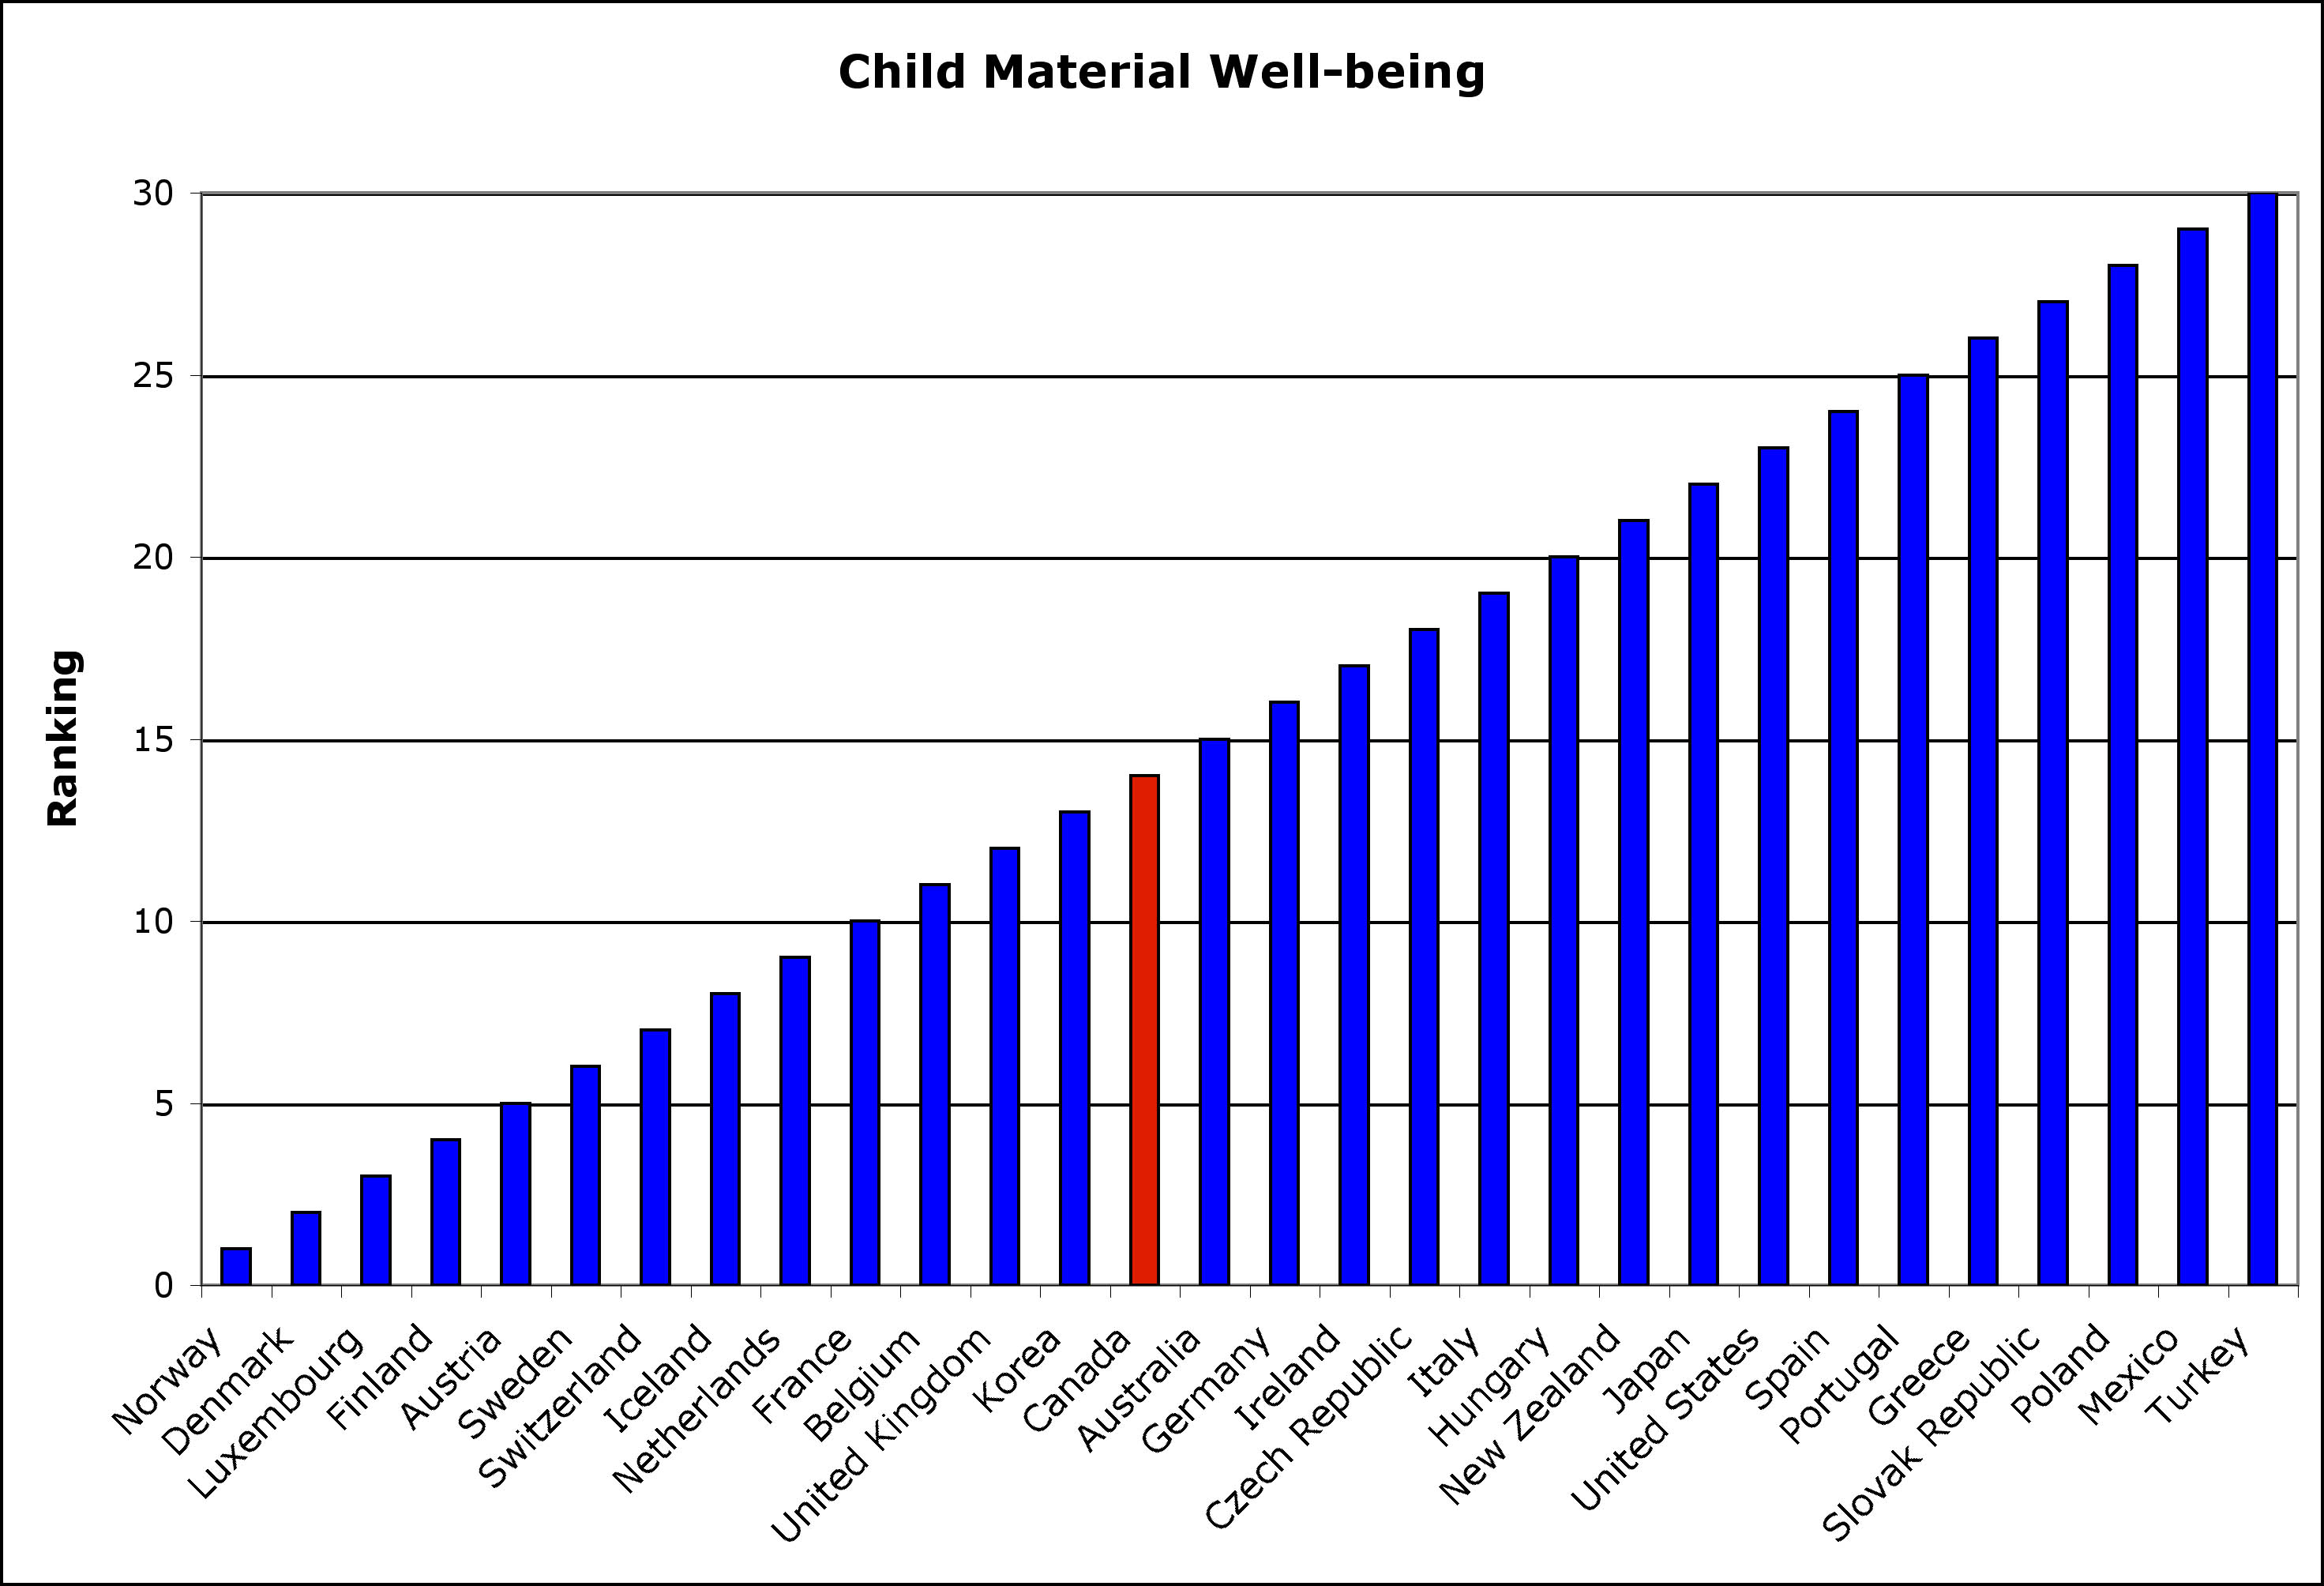 OECD Child material well-being